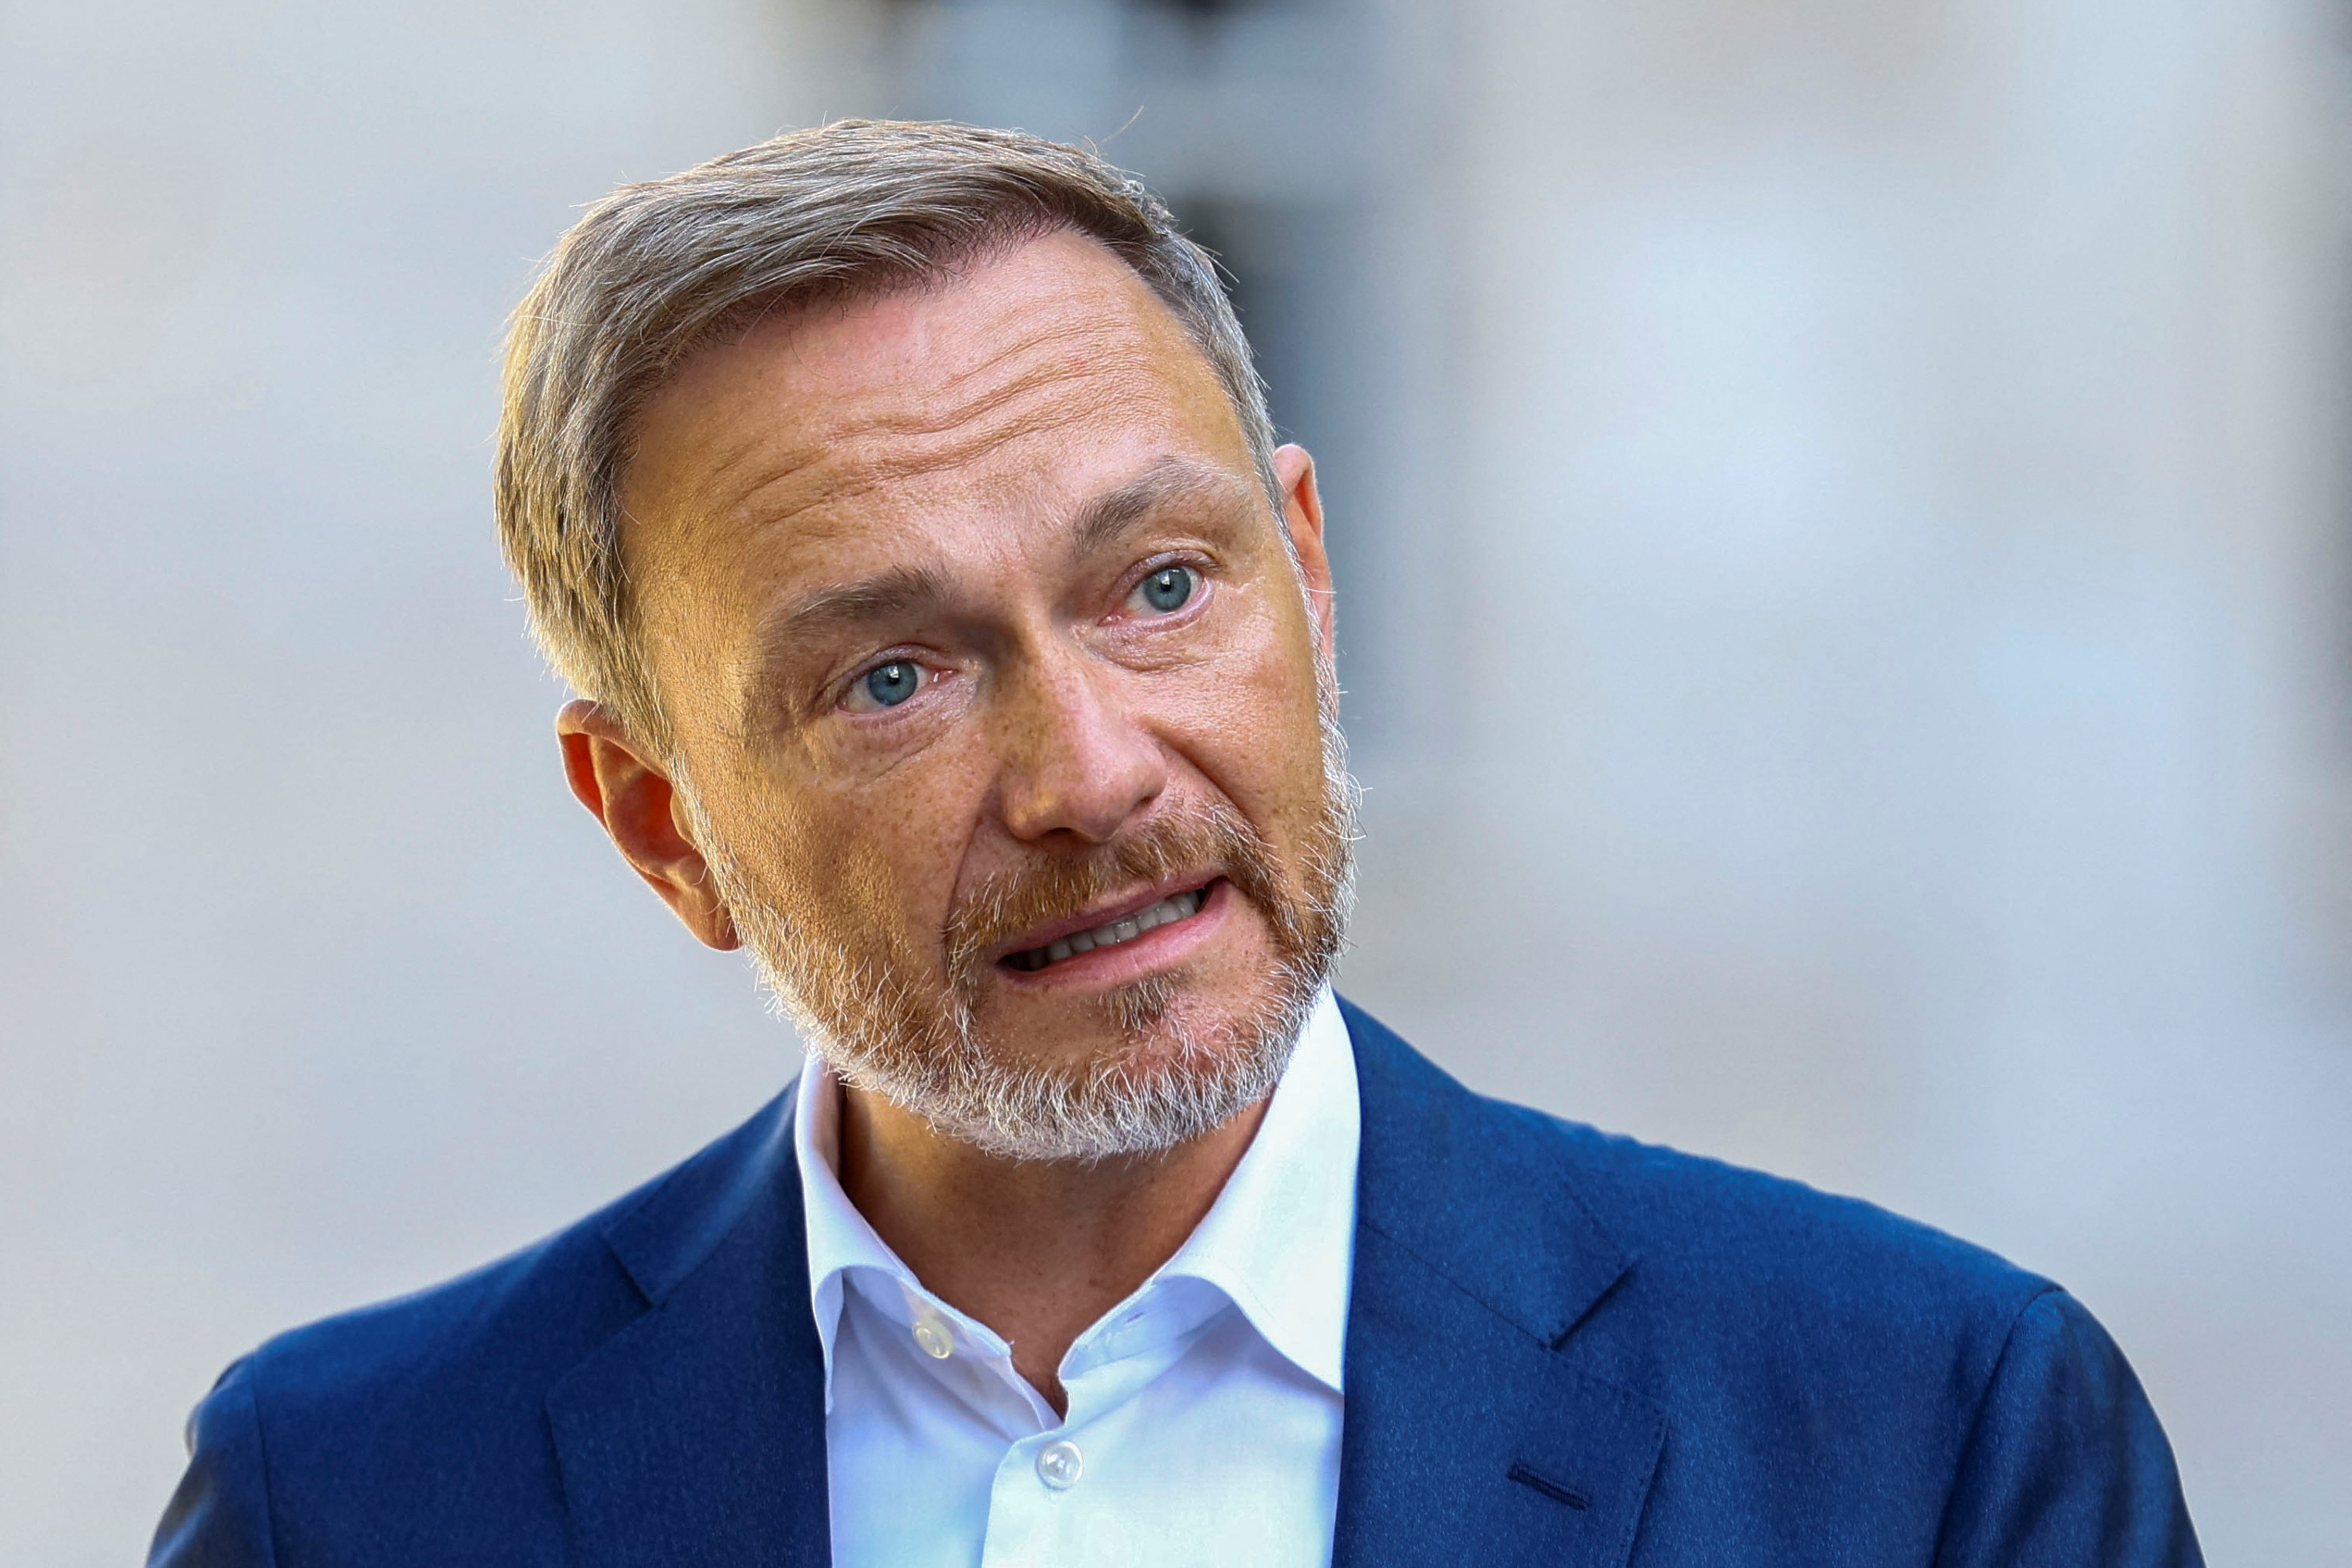 German Finance Minister Christian Lindner attends a news conference in Berlin